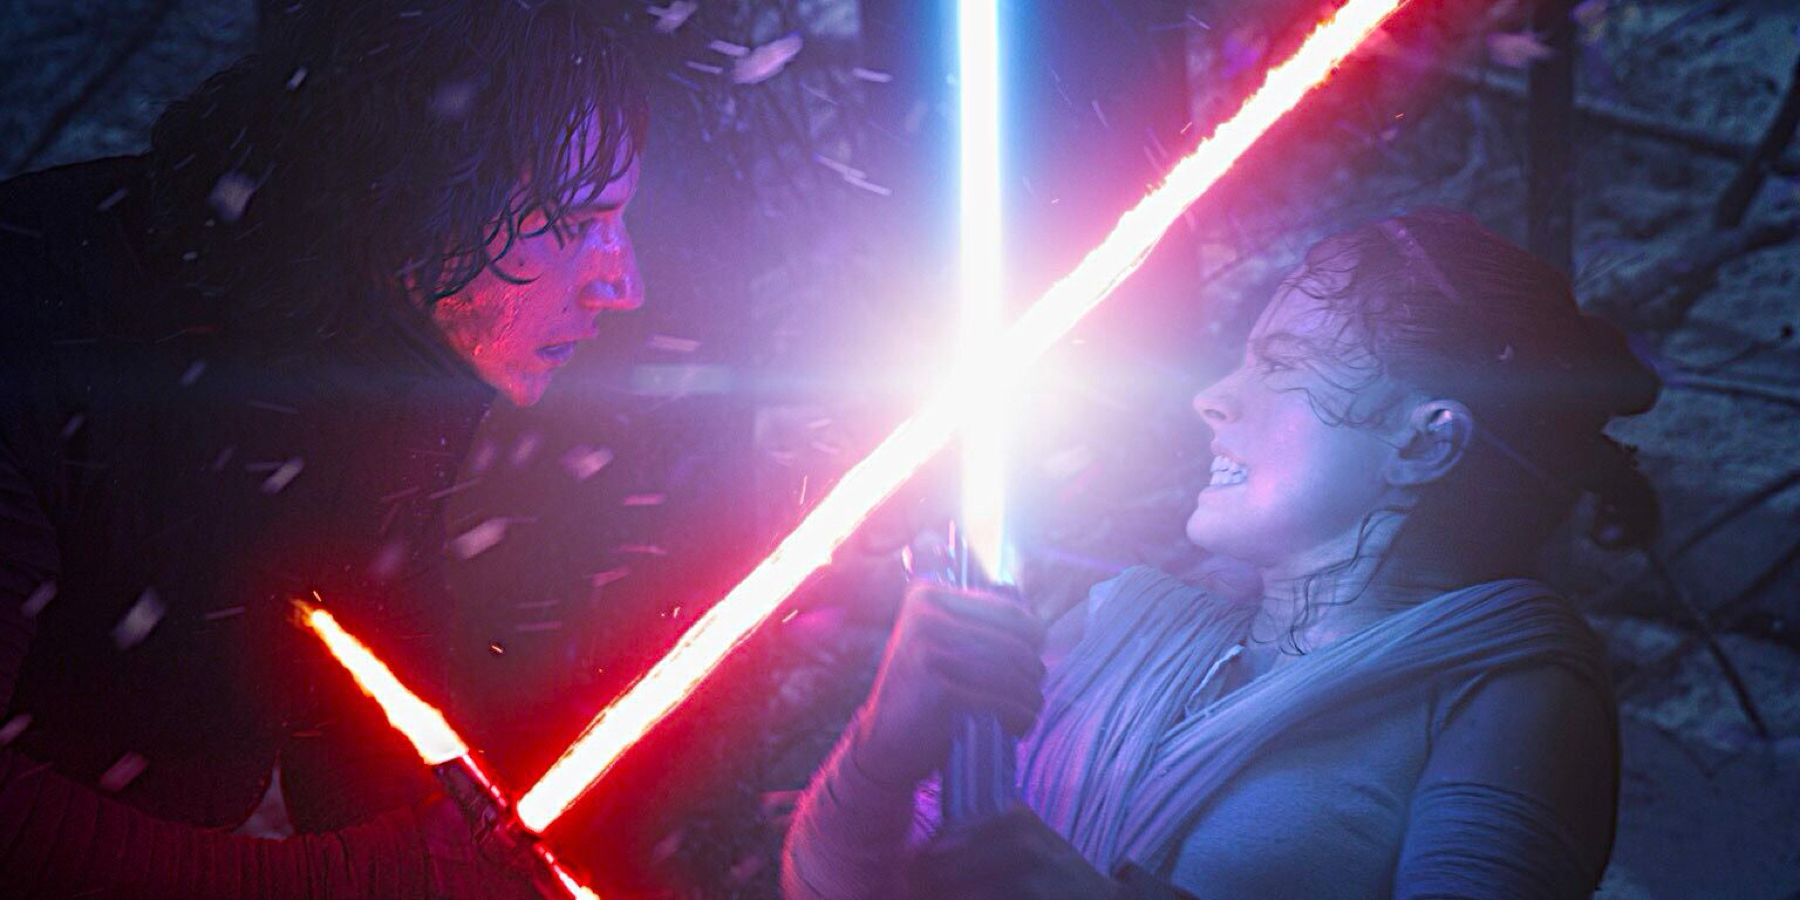 Kylo Ren, played by Actor Adam Driver, and Rey, played by Actor Daisy Ridley, grit their teeth during an intense lightsaber battle in 'Star Wars: The Force Awakens'